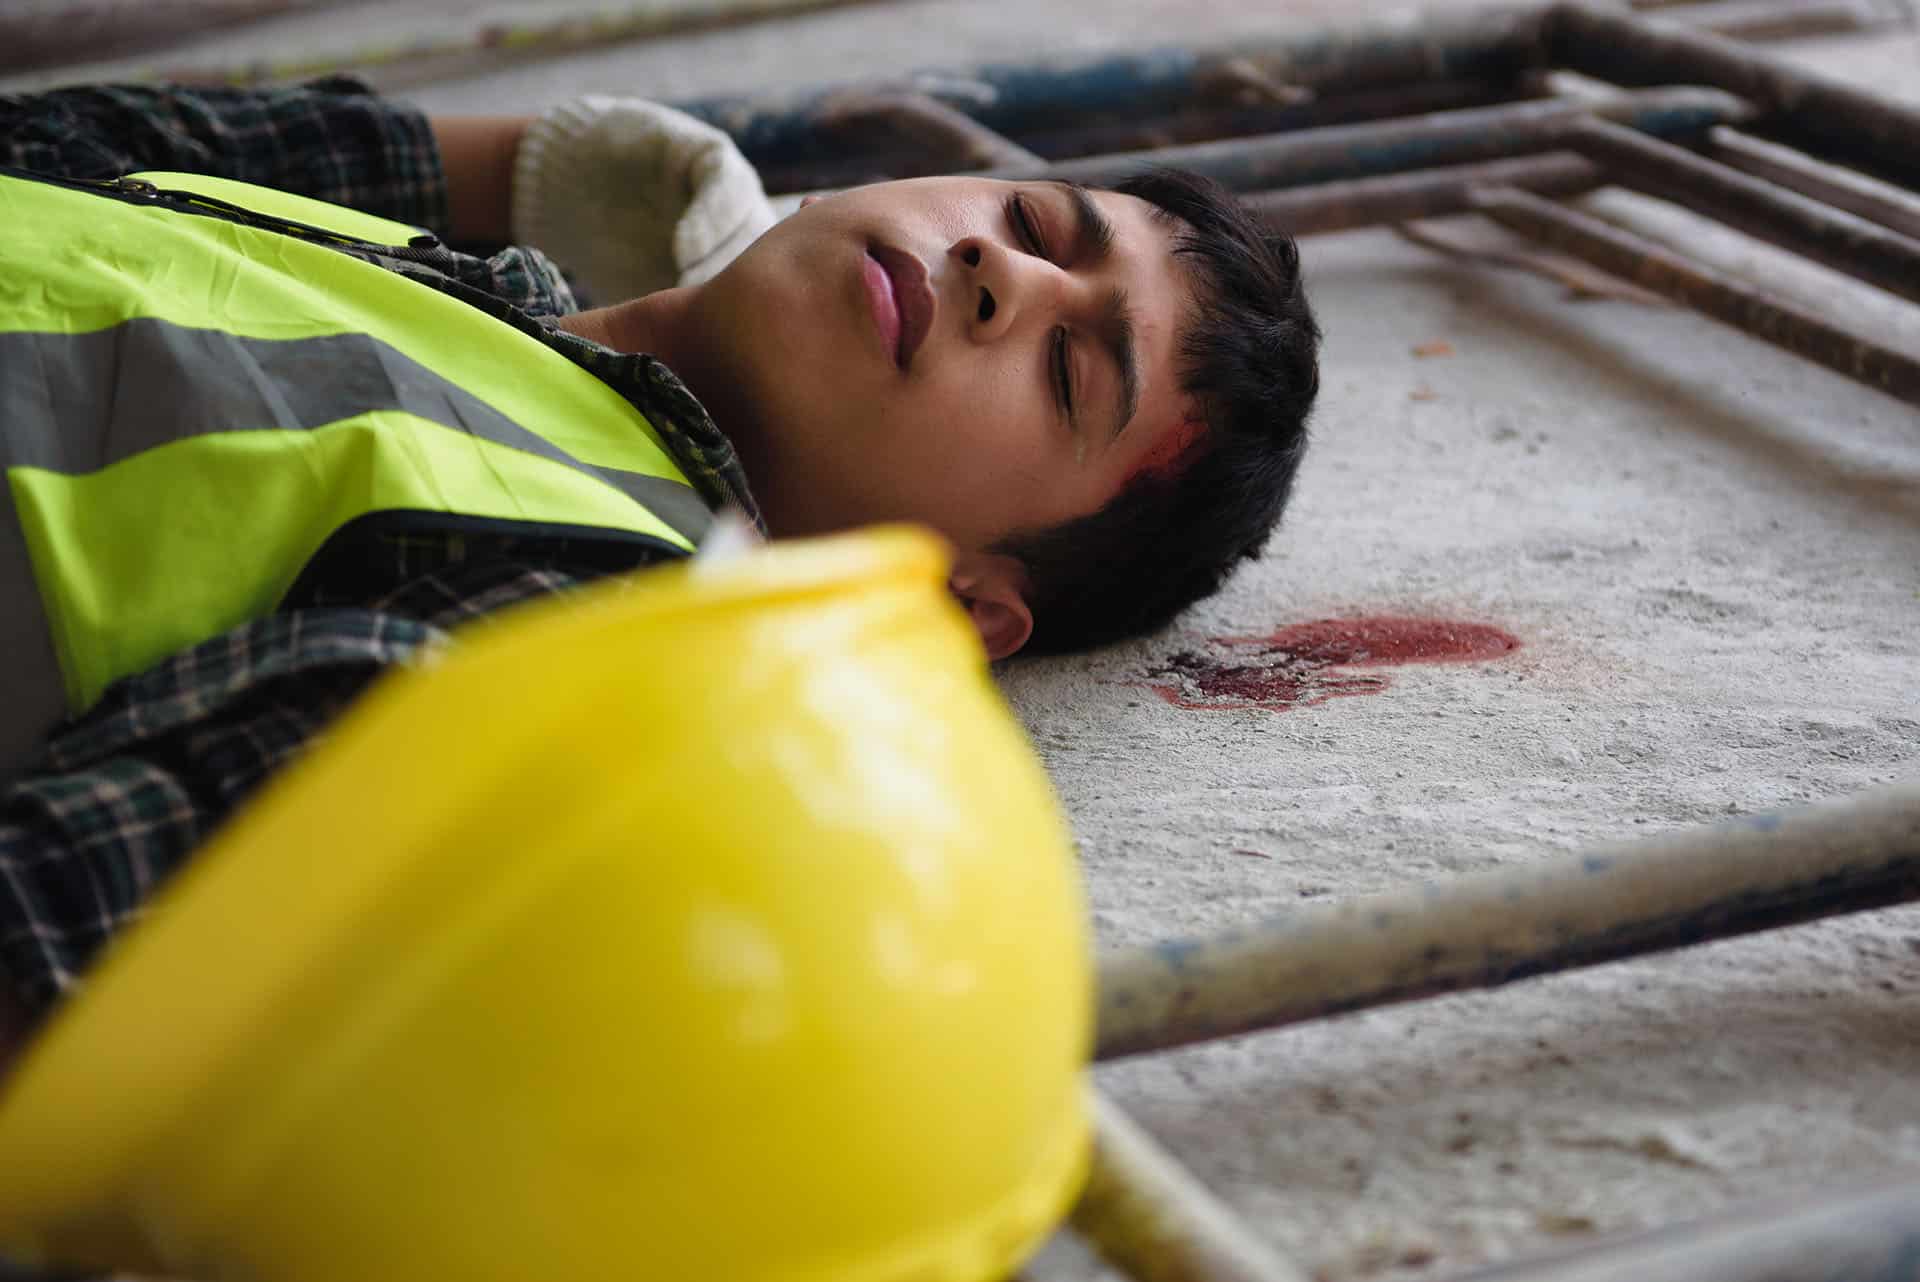 Teenager worker with trauma of the head,